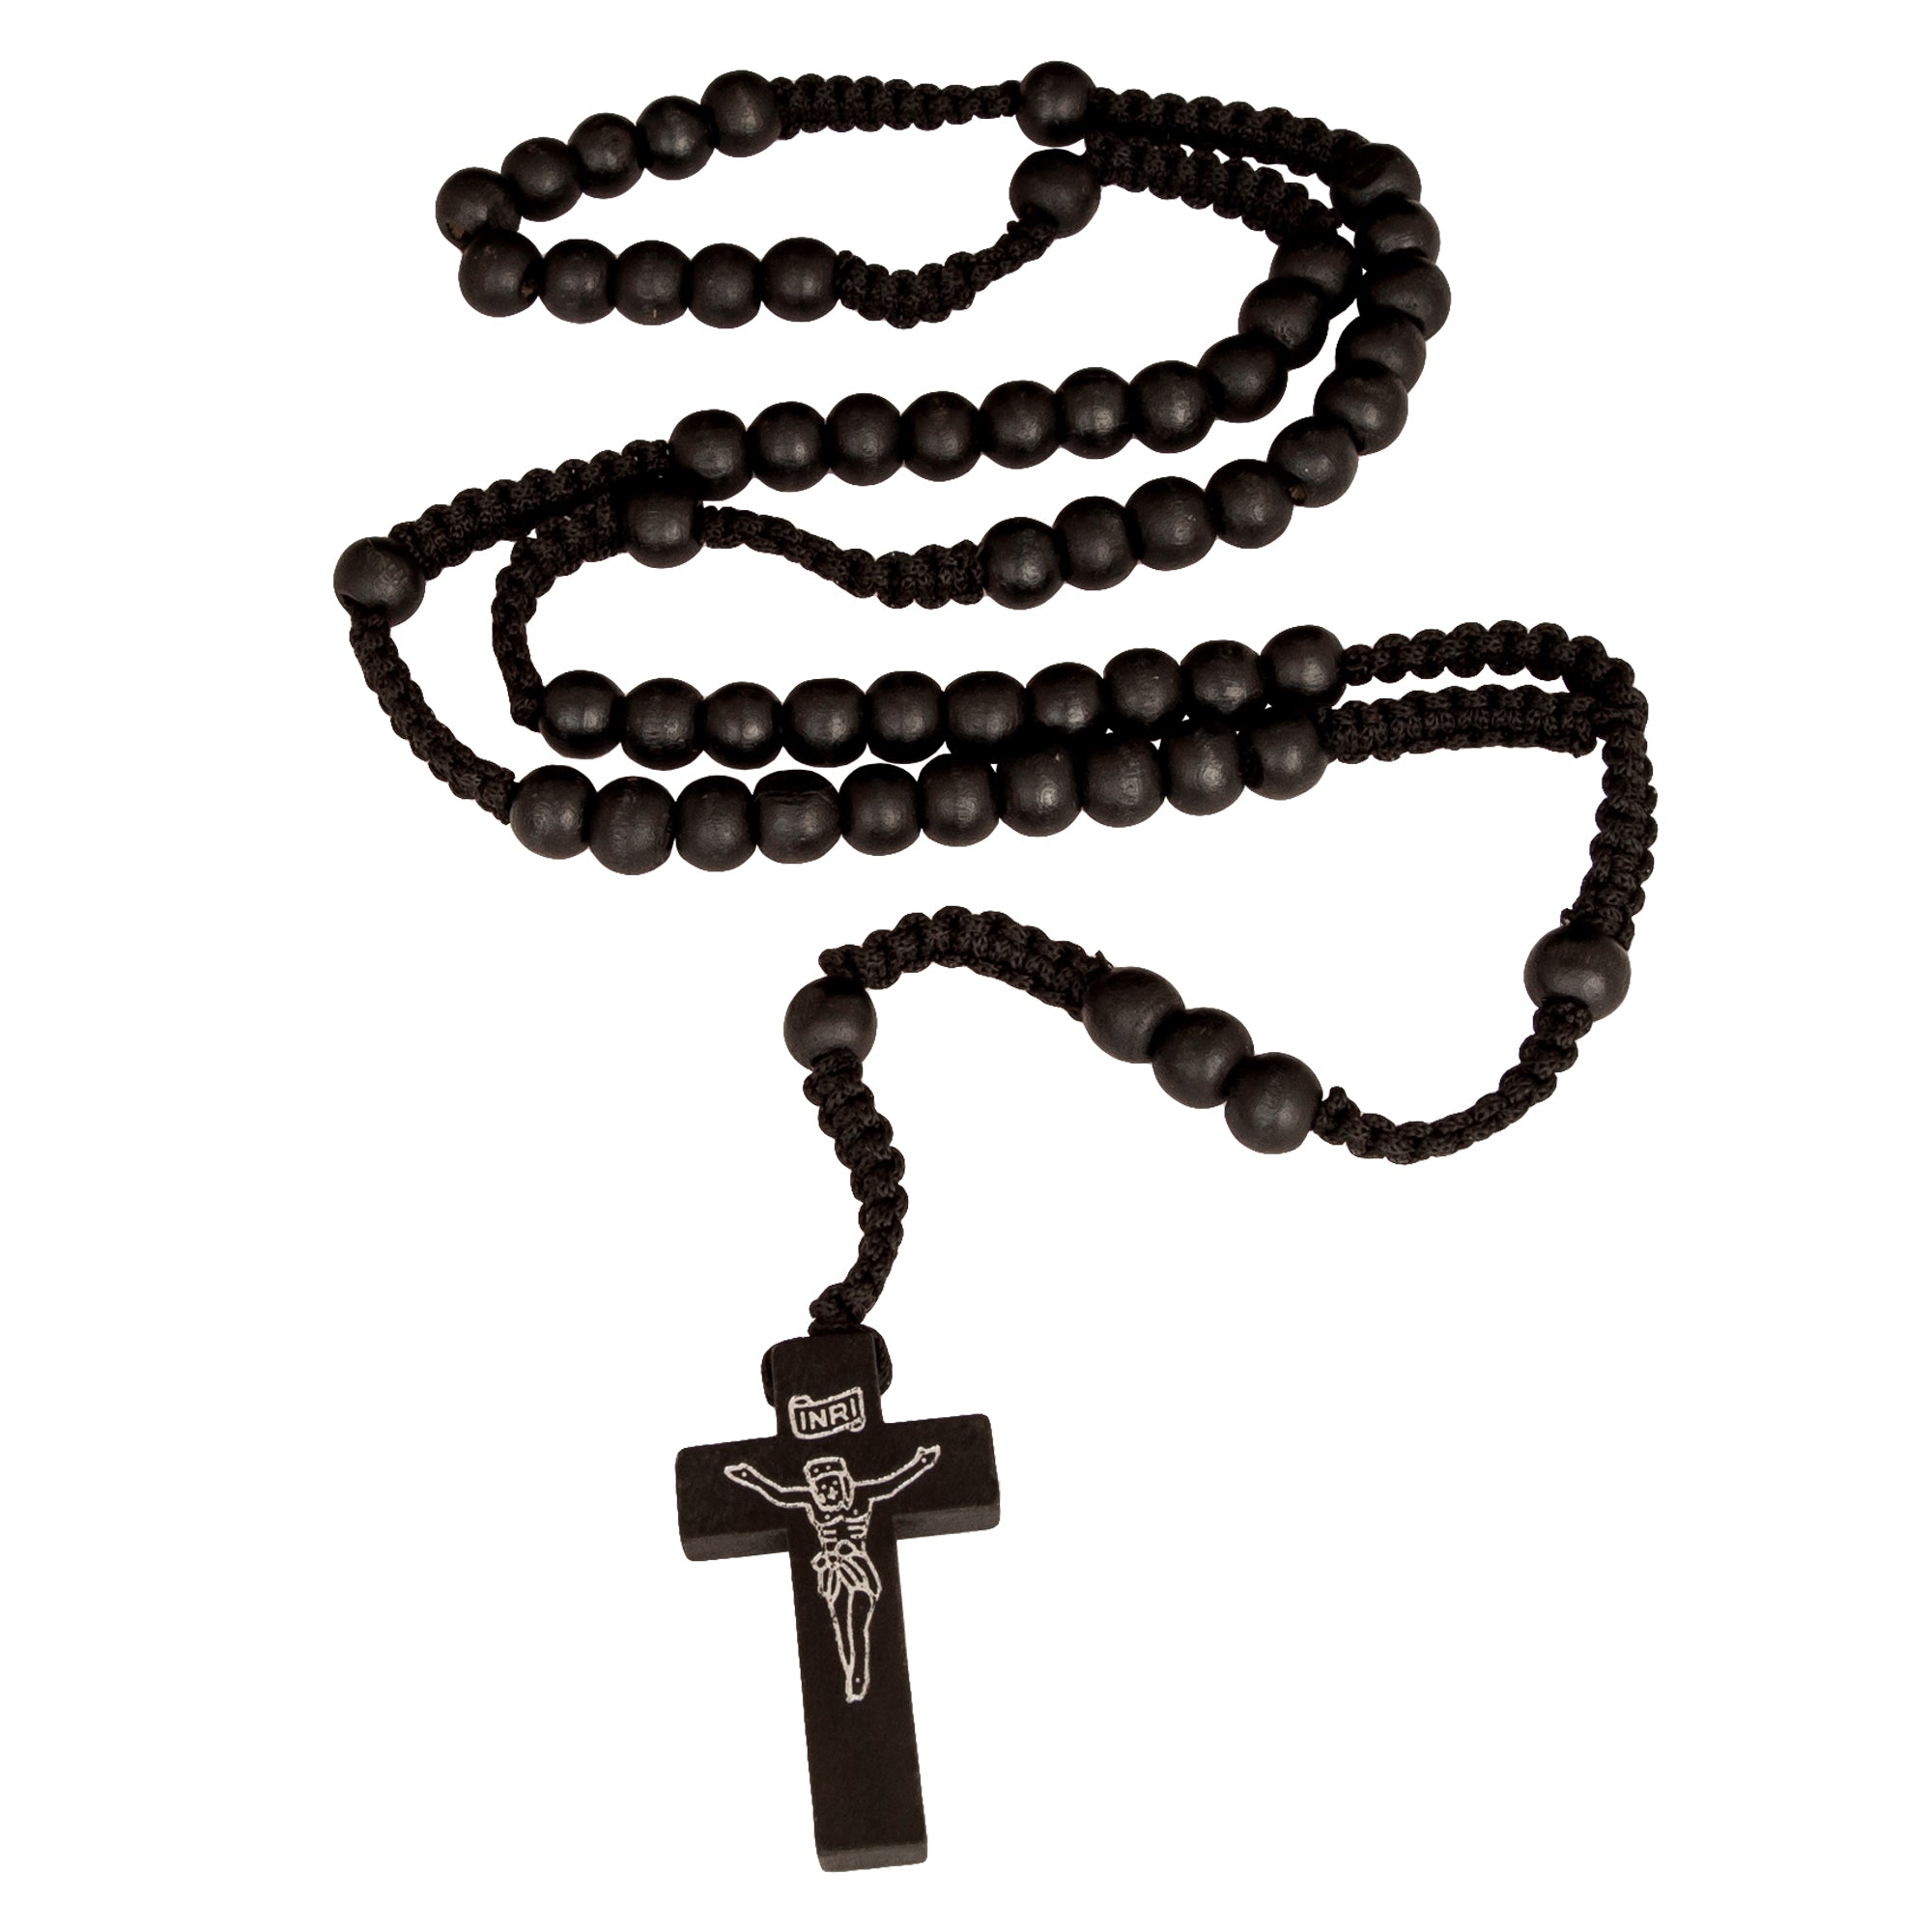 Silver rosary necklace with black Ex-Voto